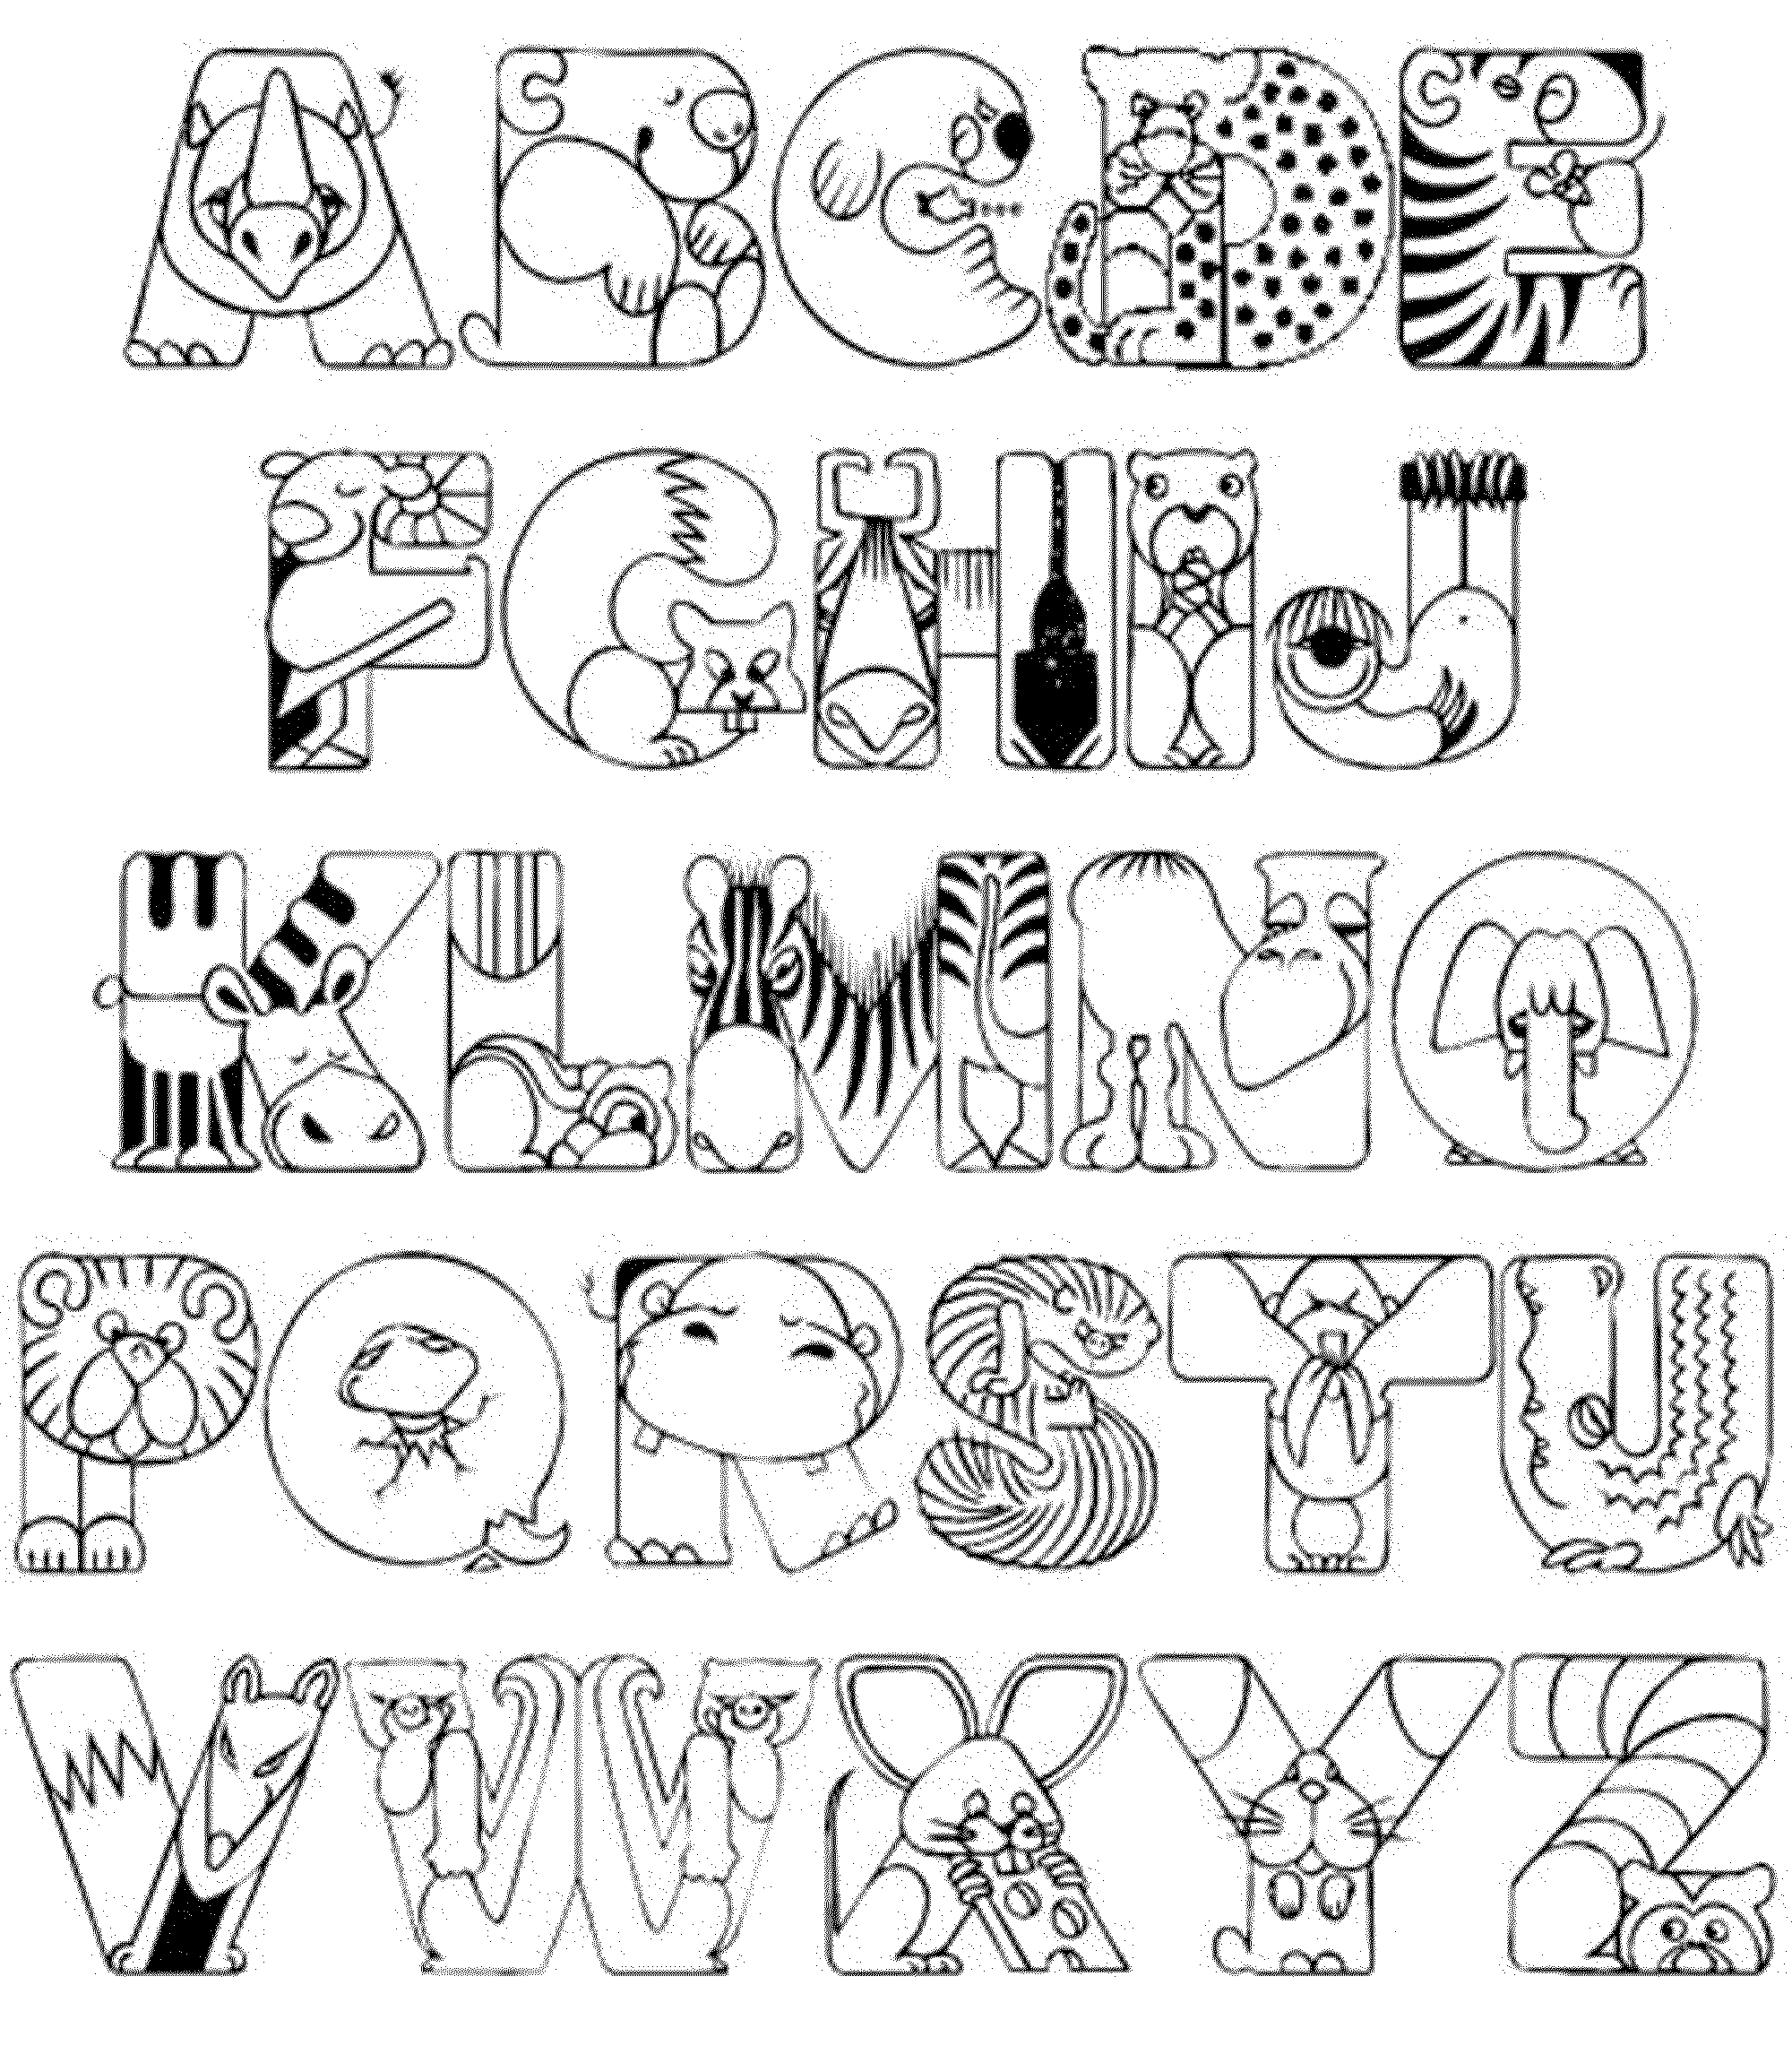 coloring sheets for kindergarten for alphabets letter w alphabet coloring pages 3 free printable for coloring for kindergarten alphabets sheets 